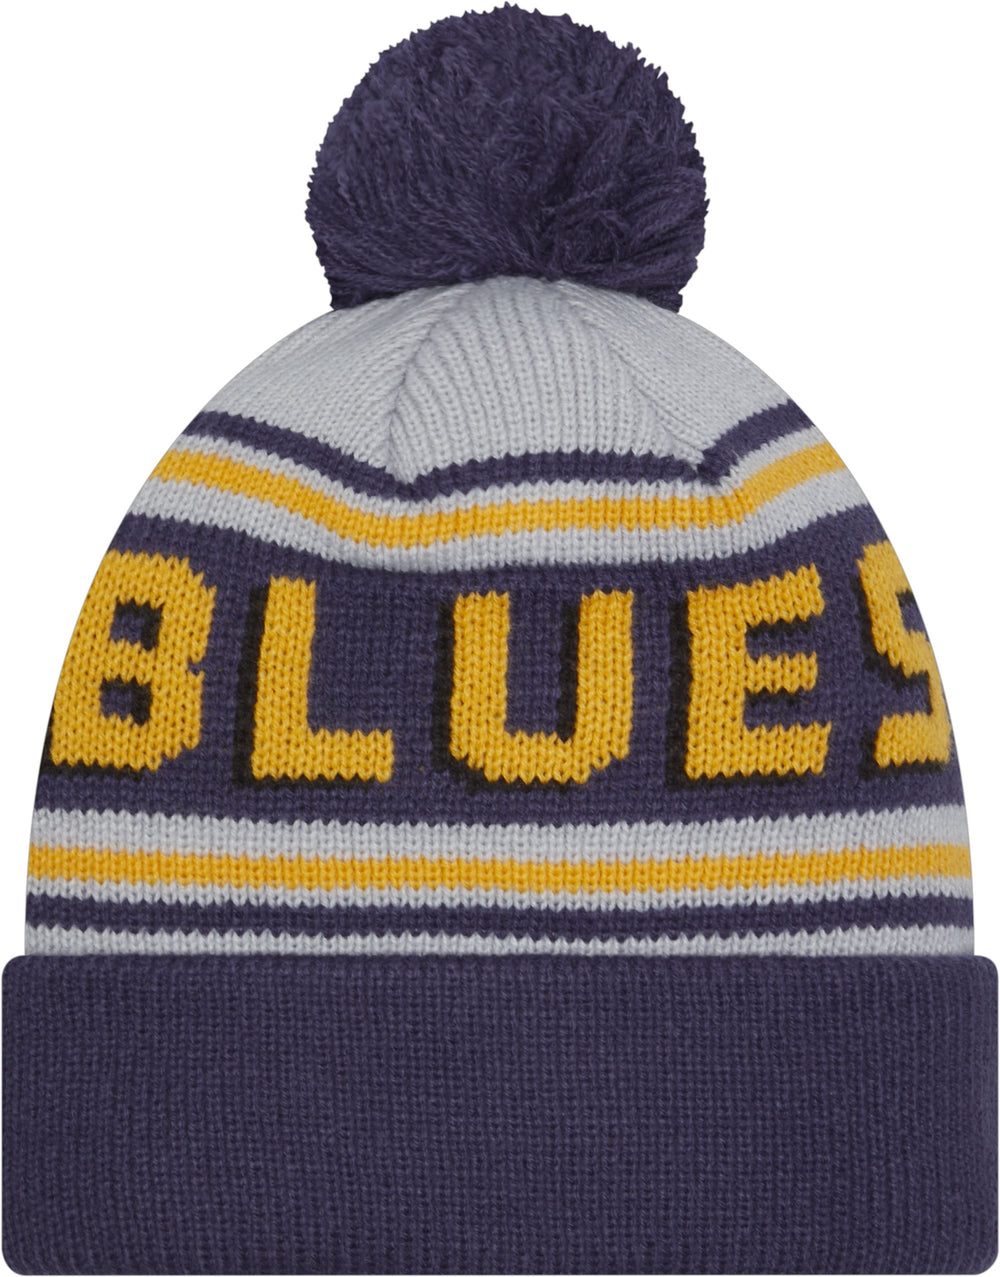 ST. LOUIS BLUES VINTAGE HONE PATCH '47 CUFF KNIT OSF / NATURAL / A